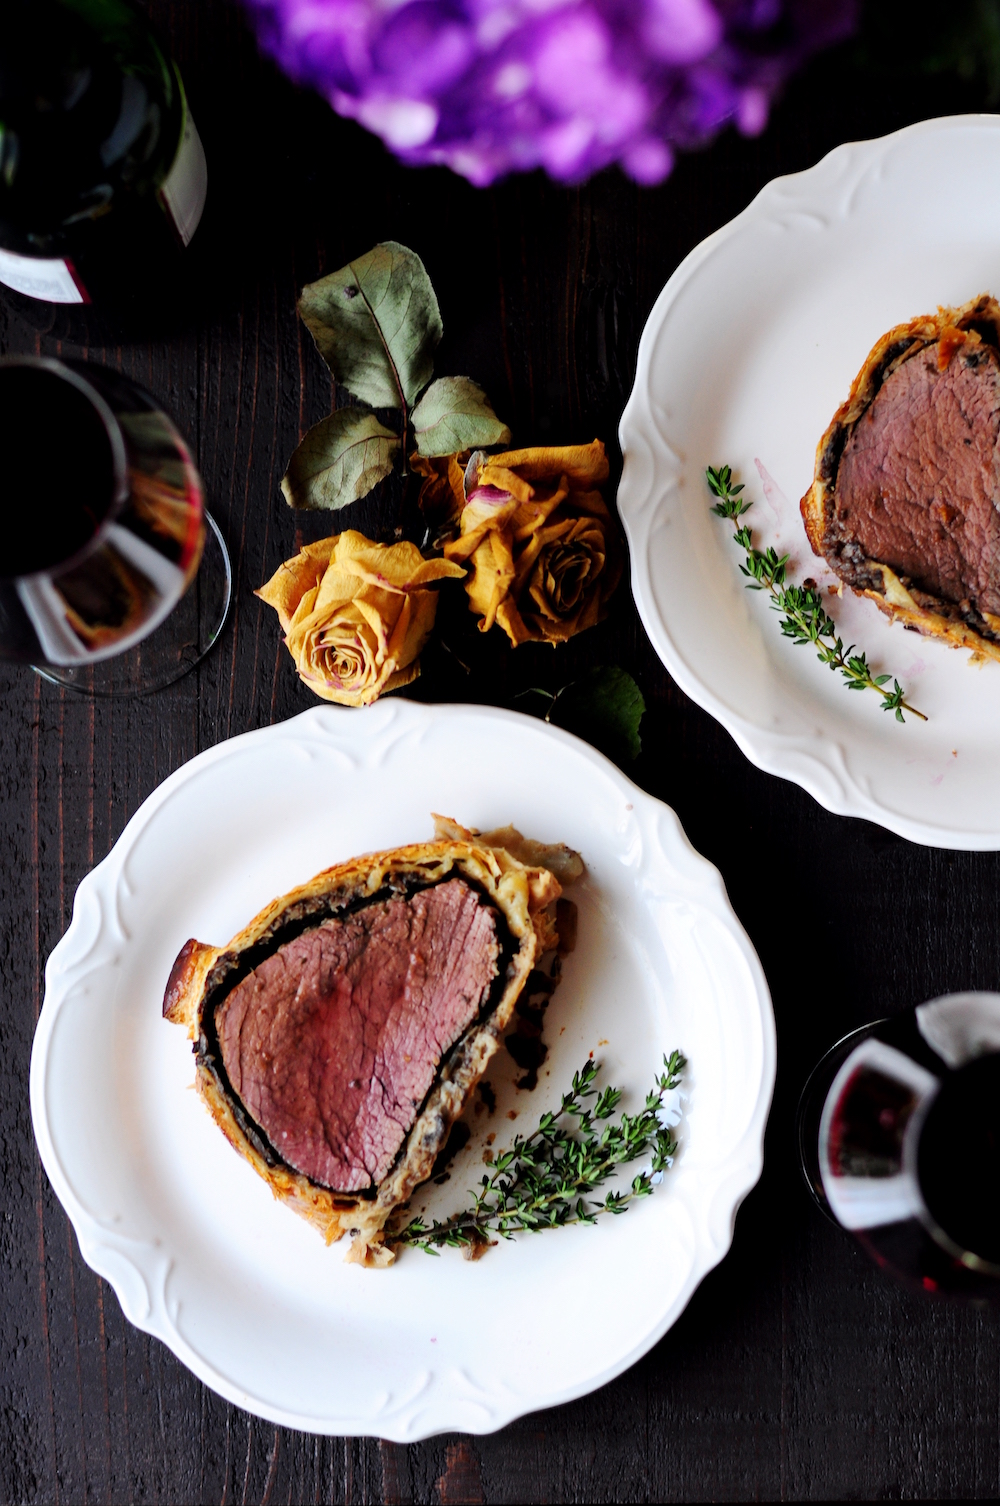 This beef wellington recipe is a perfect date-night-in dish. It’s classic, fancy, and indulging but not too difficult to put together. With a few tricks, you’ll be able to make this famous main course for any special occasion.